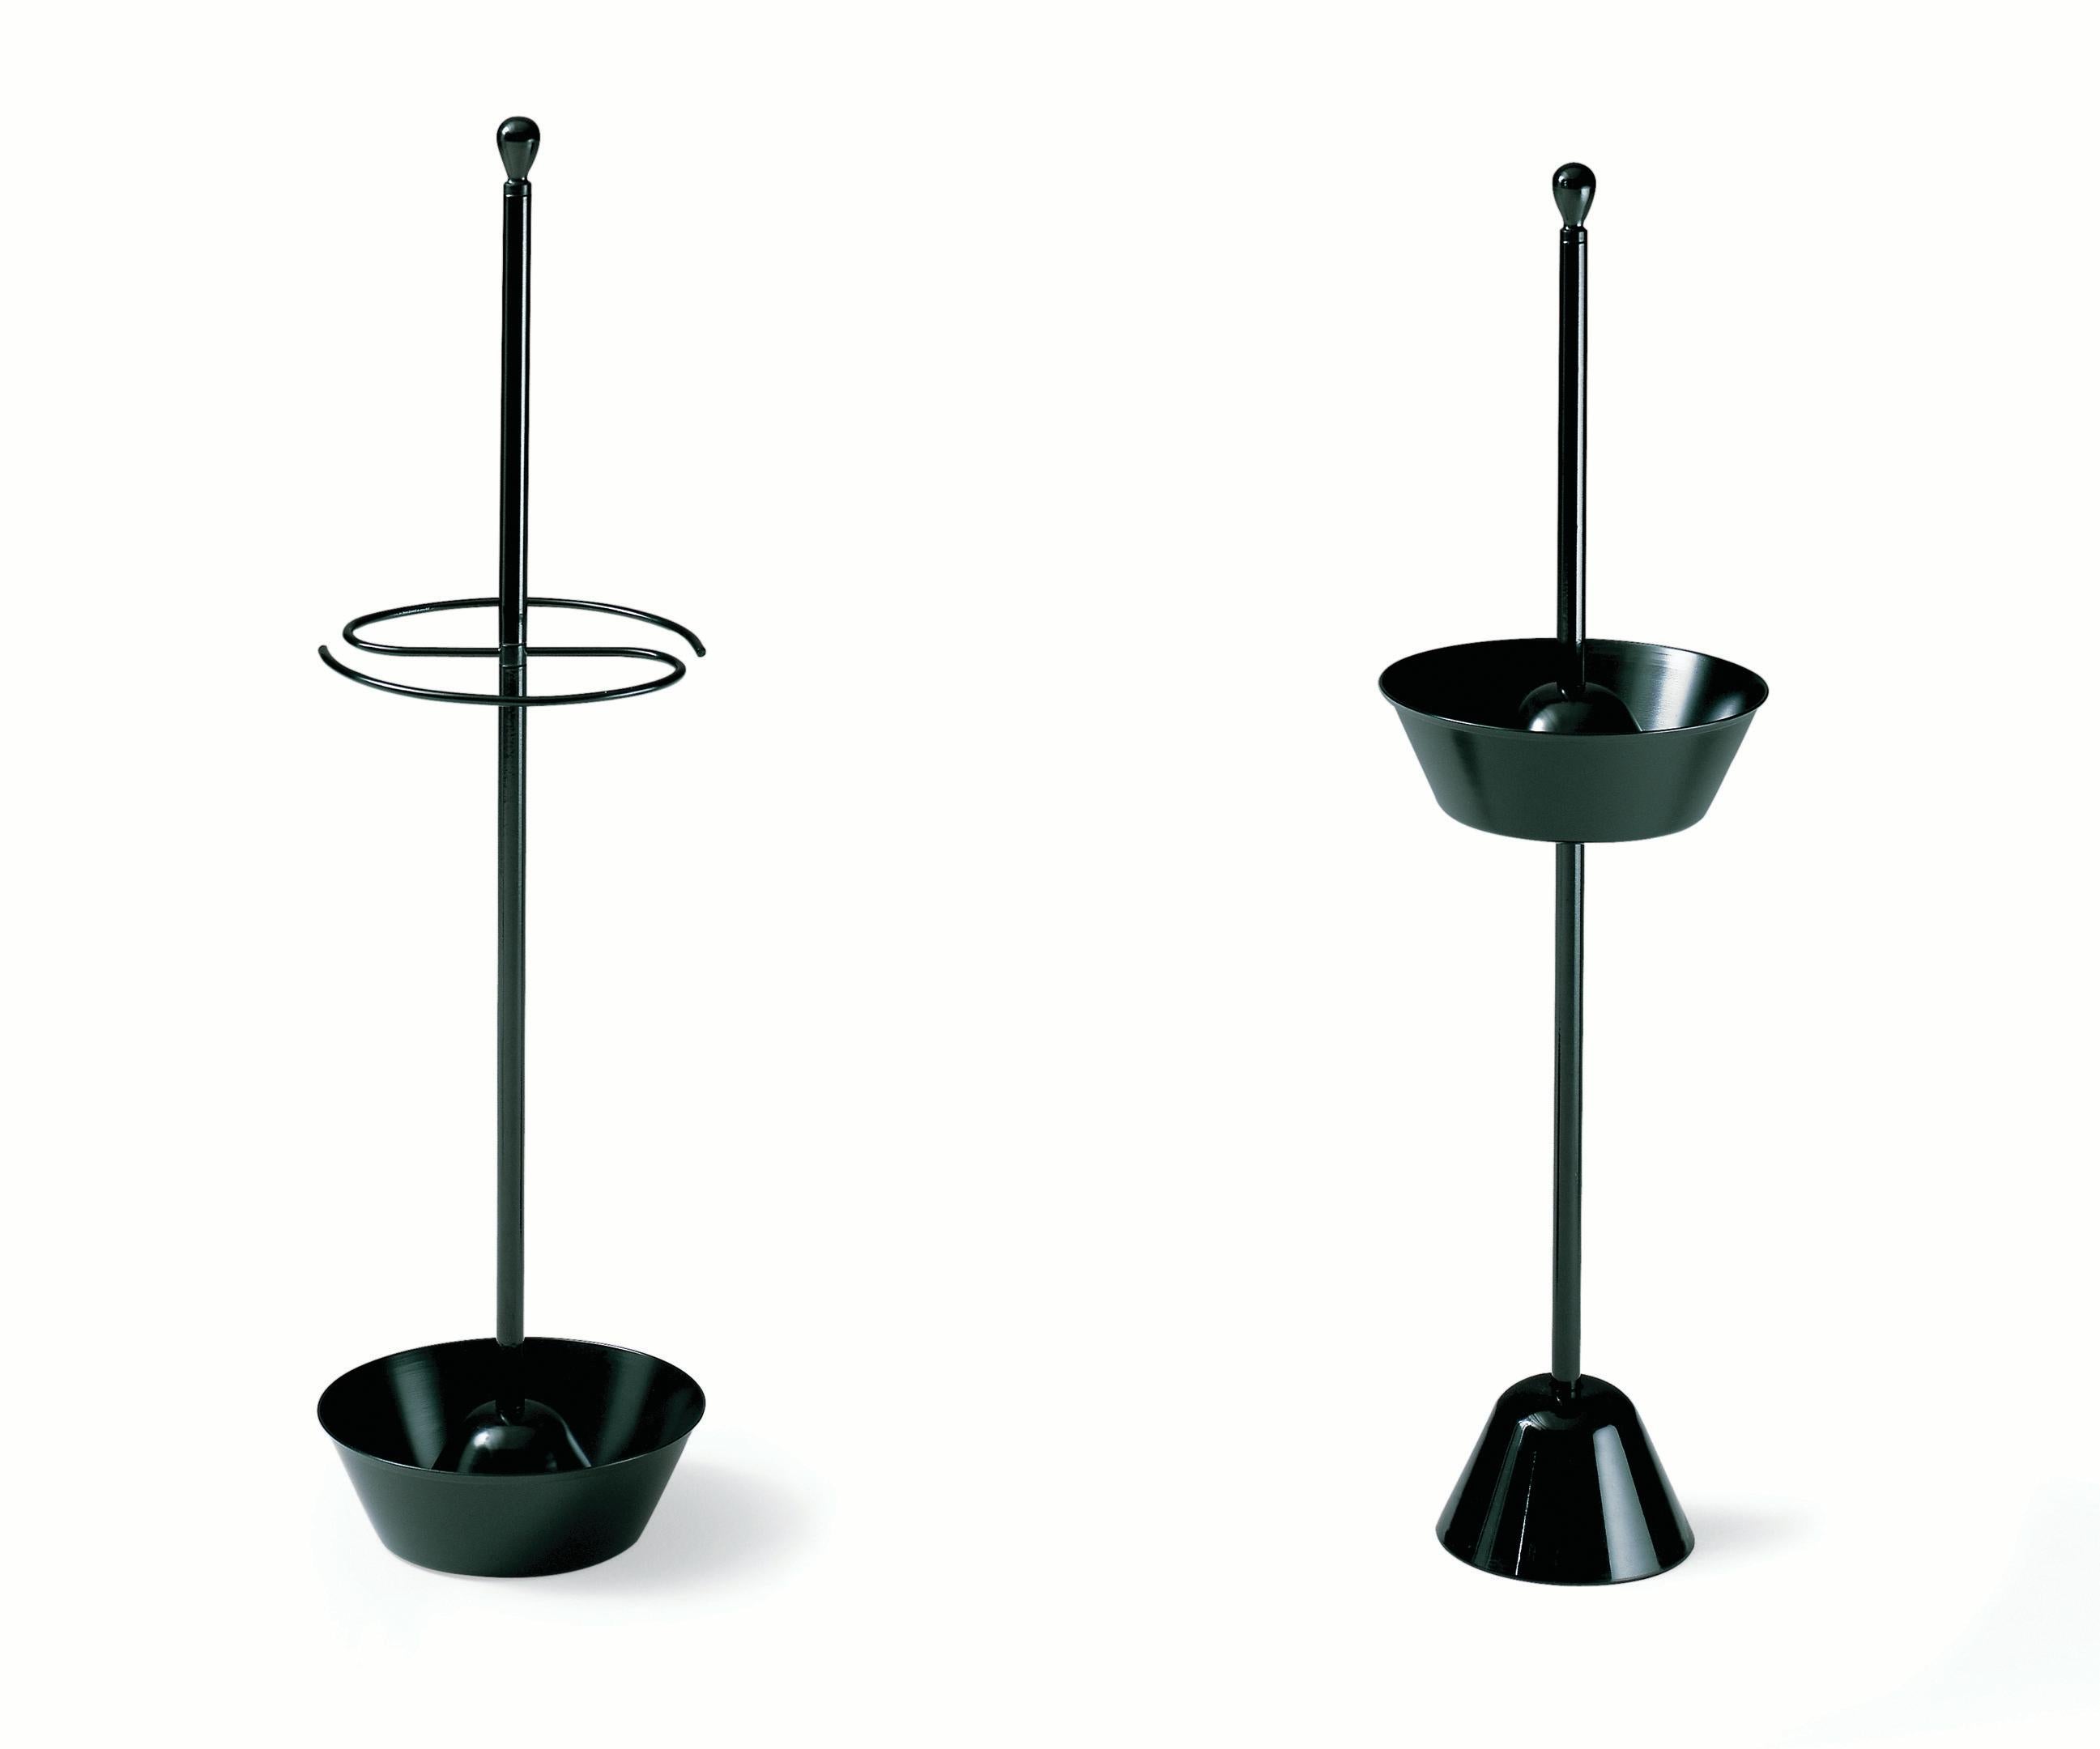 Zanotta Servofumo Low Ashtray in Steel by Achille and Pier Giacomo Castiglioni

Base in black painted polypropylene. Steel support rod and aluminium sand container, black painted for outdoors . The ashtray has a black colour painted steel rhomboid